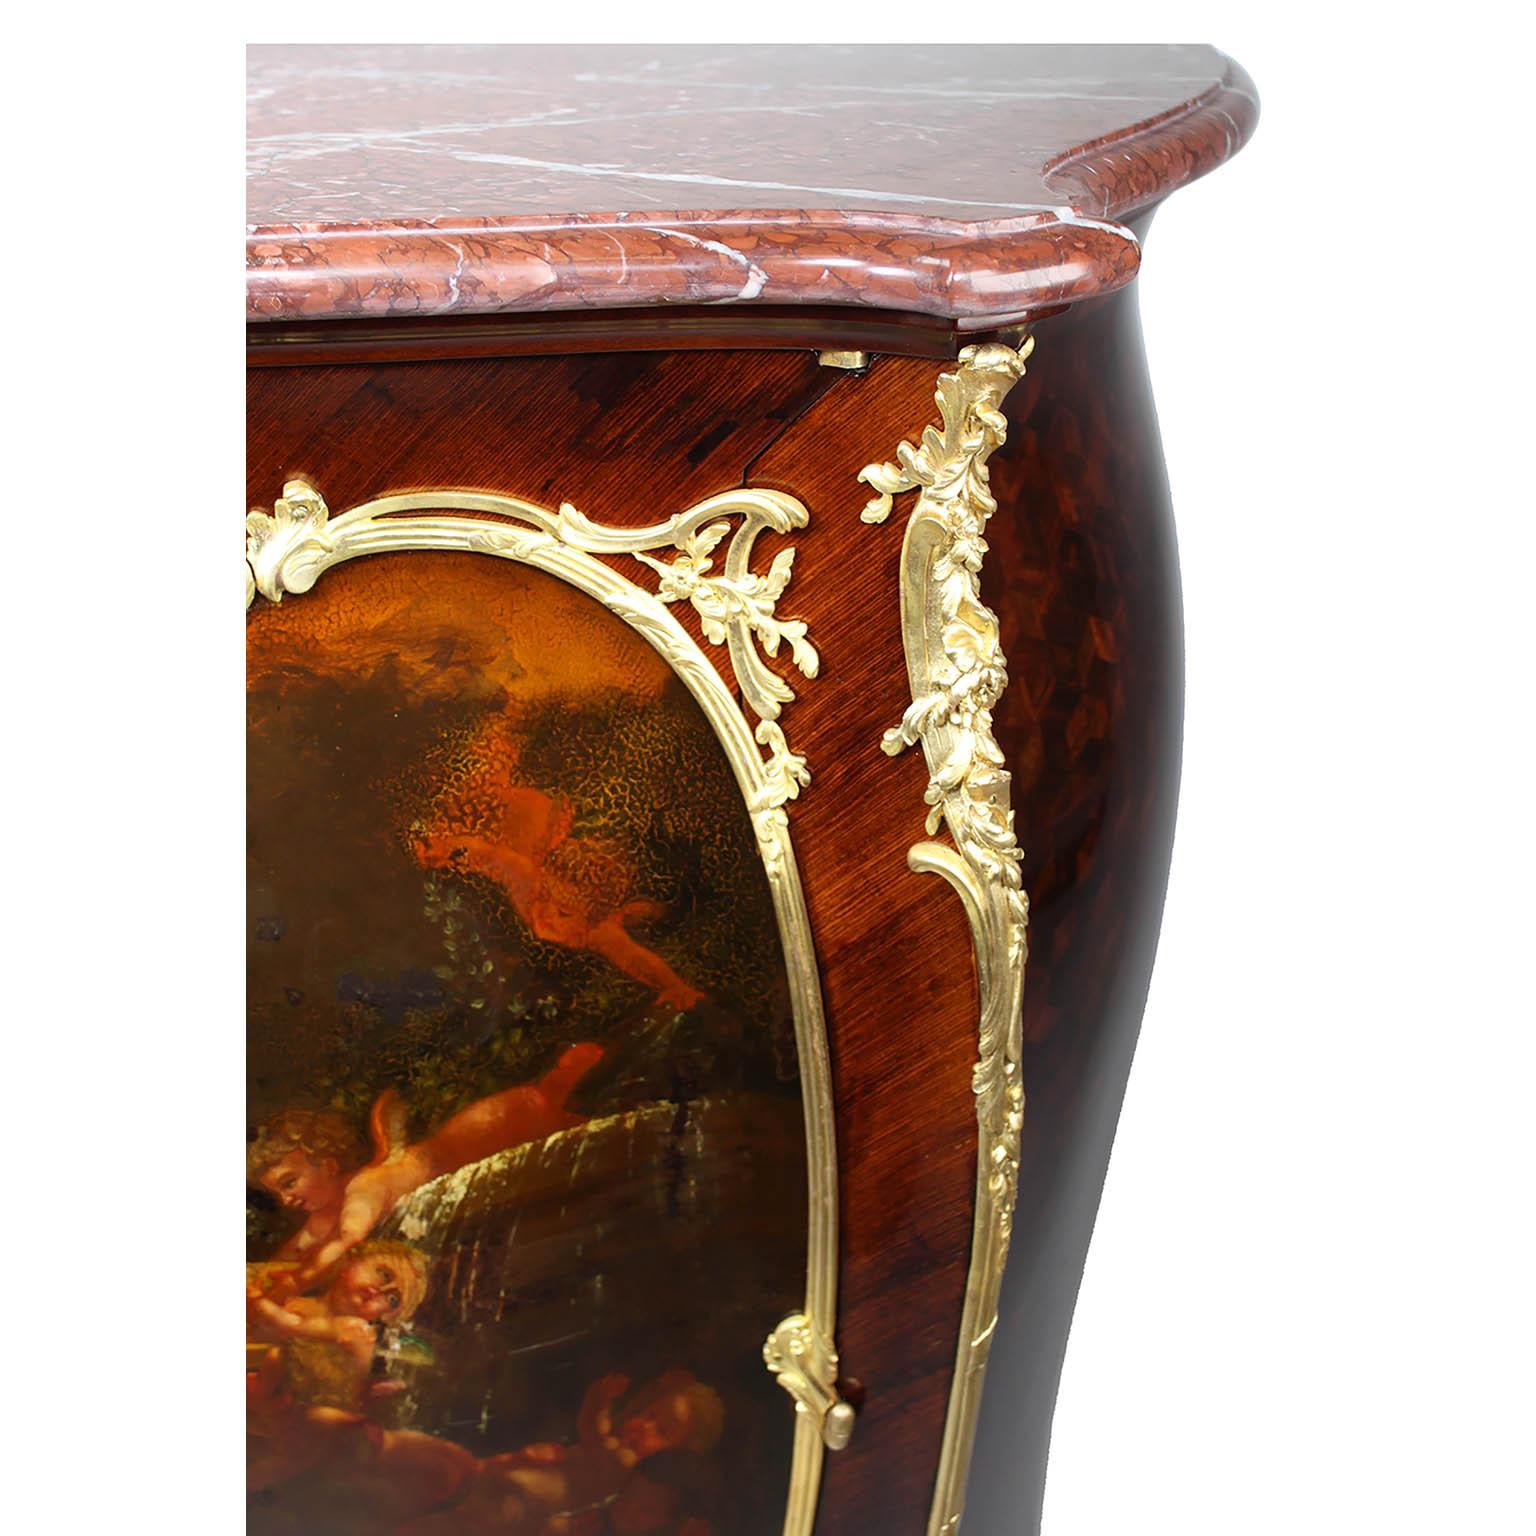 Early 20th Century French 19th C. Louis XV Style Ormolu-Mounted Vernis Martin Cabinet by F. Linke For Sale